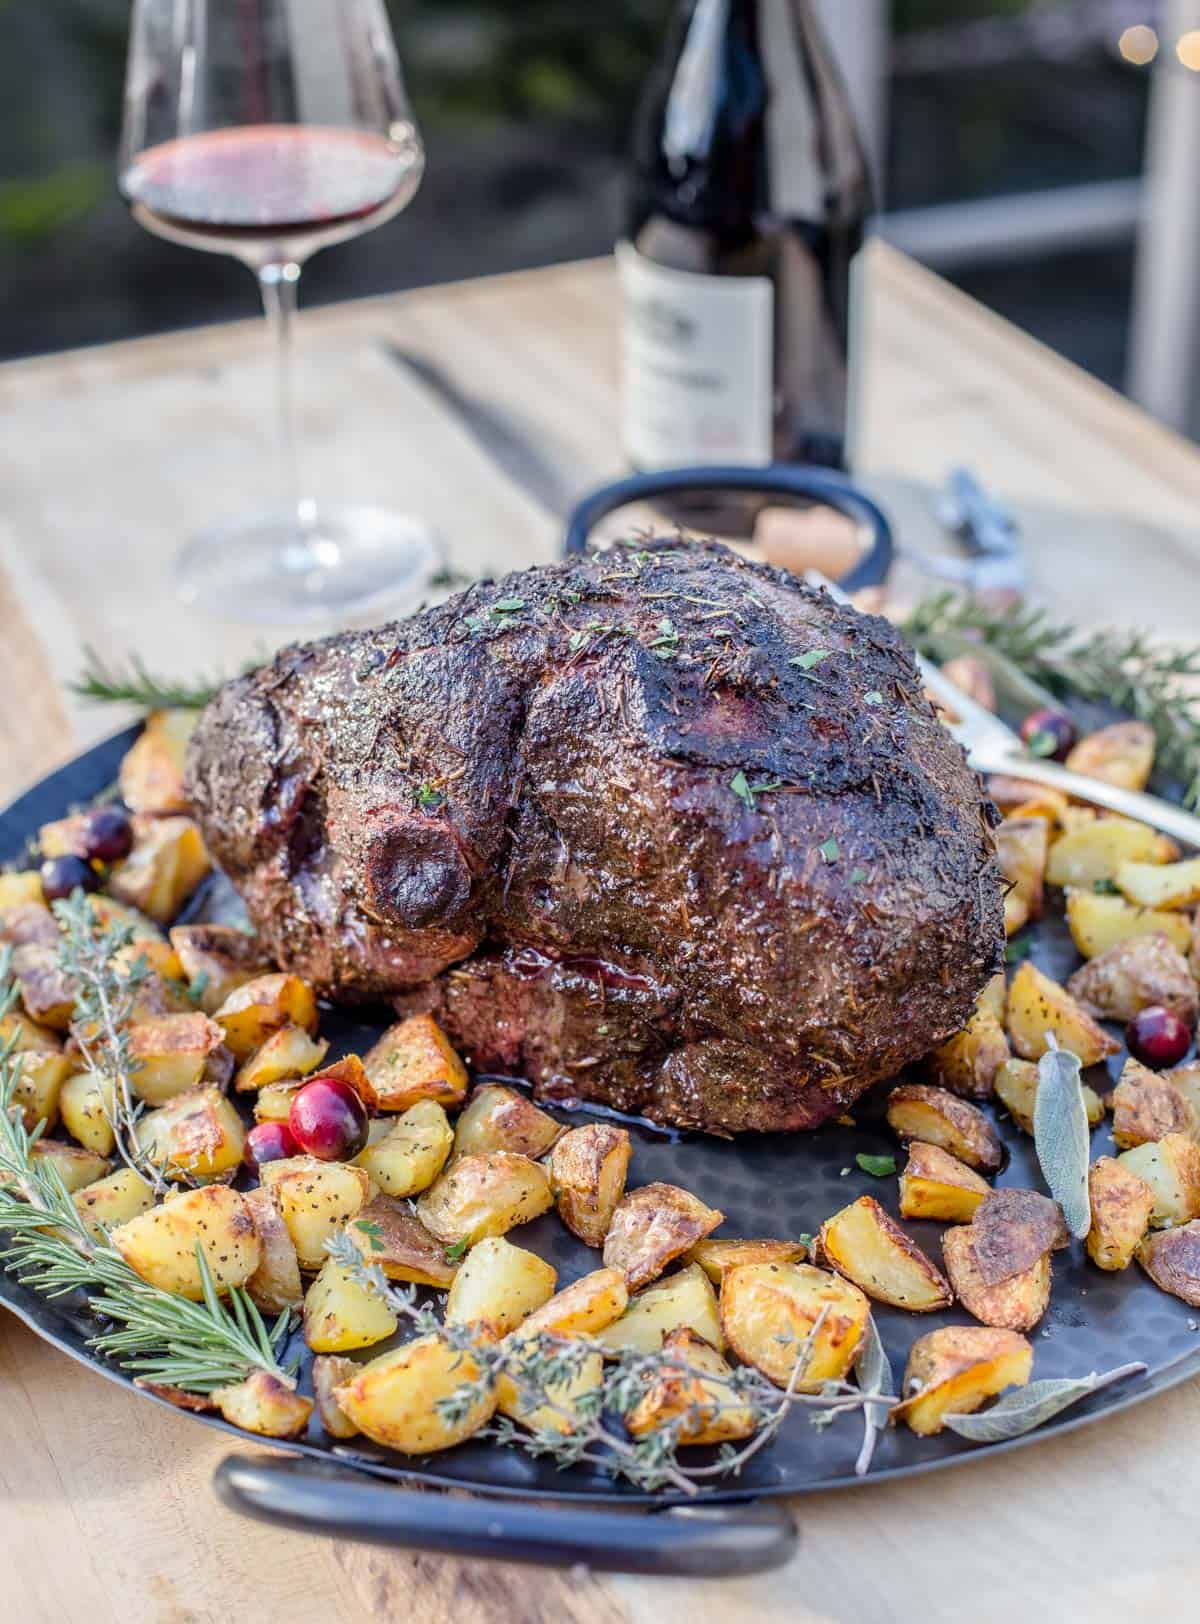 A smoked leg of lamb on a platter with roasted potatoes